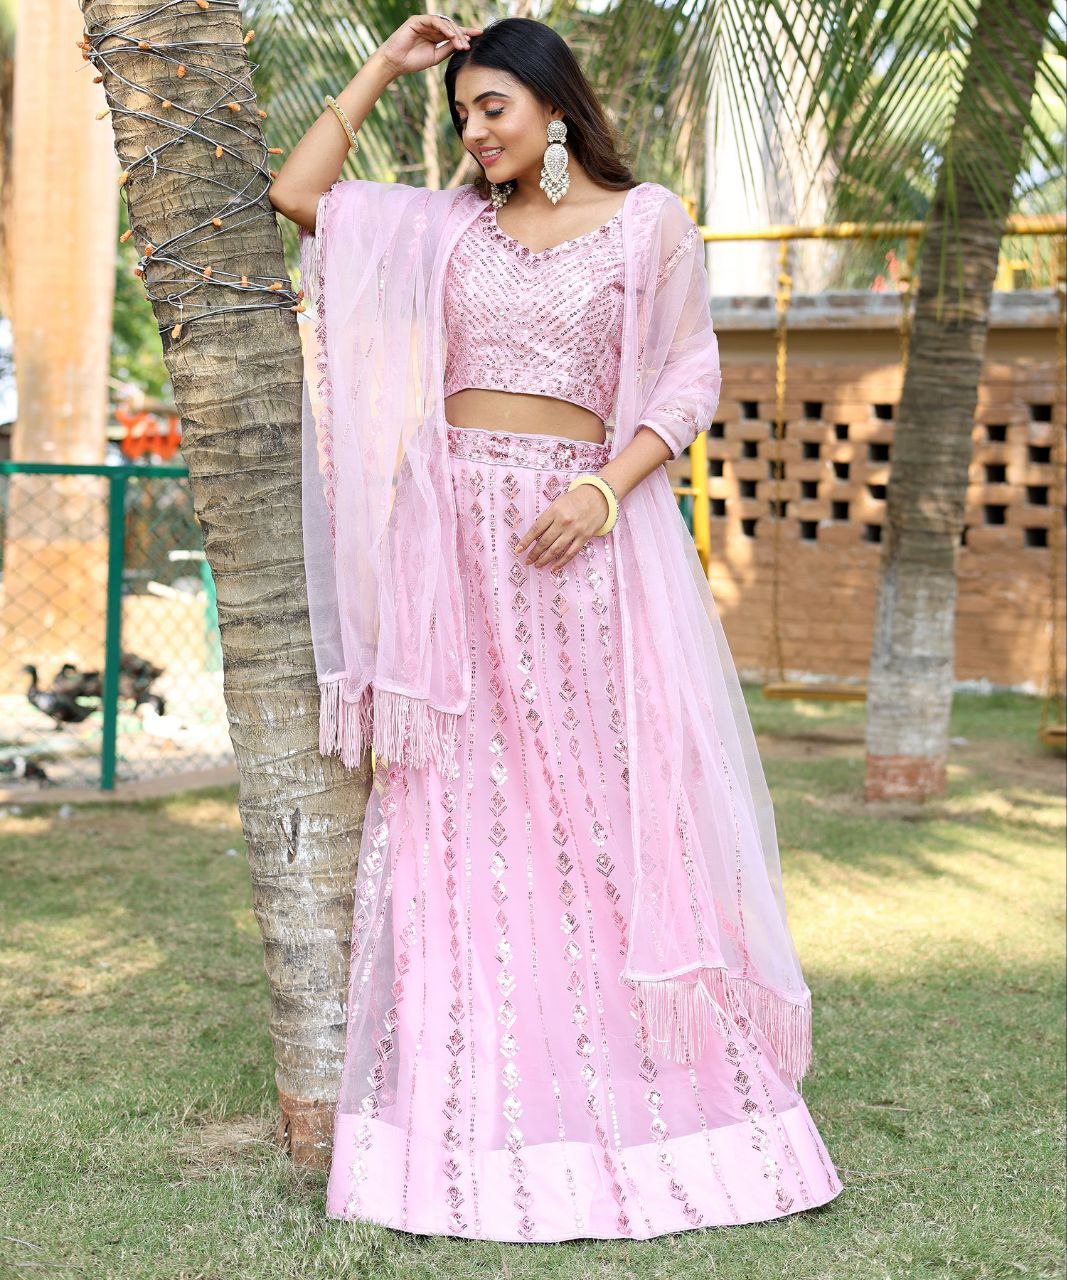 Vanesons Silks - FRINGE DRAPE LEHENGA WITH ATTACHED DUPATTA Featuring a  Dark bottle green Fringe Drape Lehenga with a Heavily Embroidered Designer  Blouse..All new fusion collections at Vanesons Silks Lamington Road Hubli. |